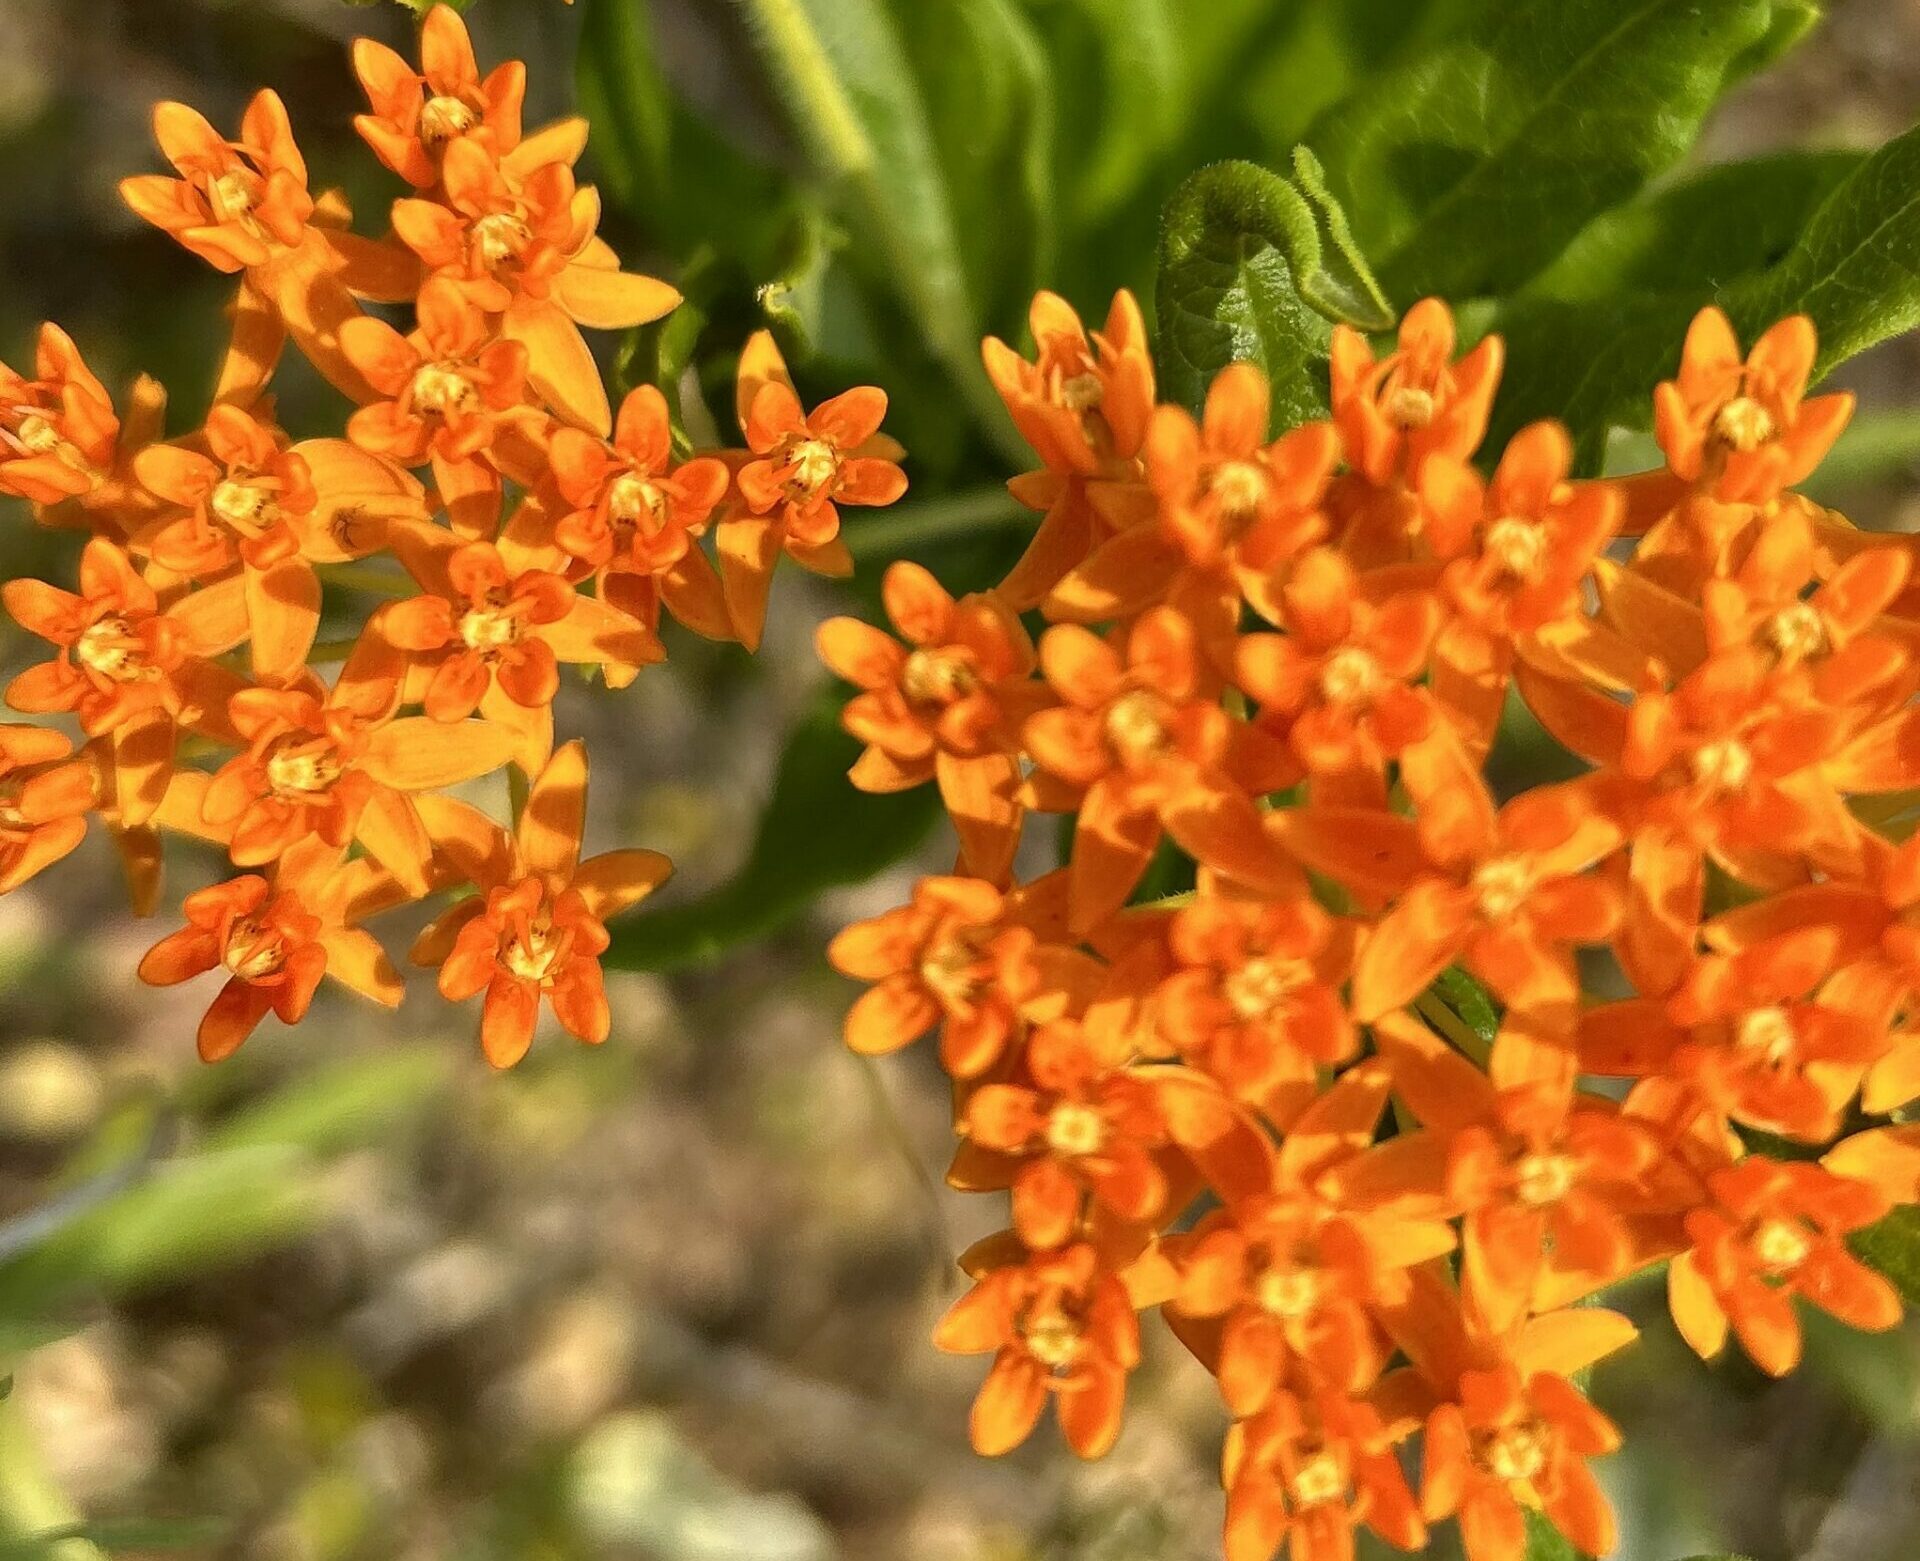 Clusters of small bright orange flowers.